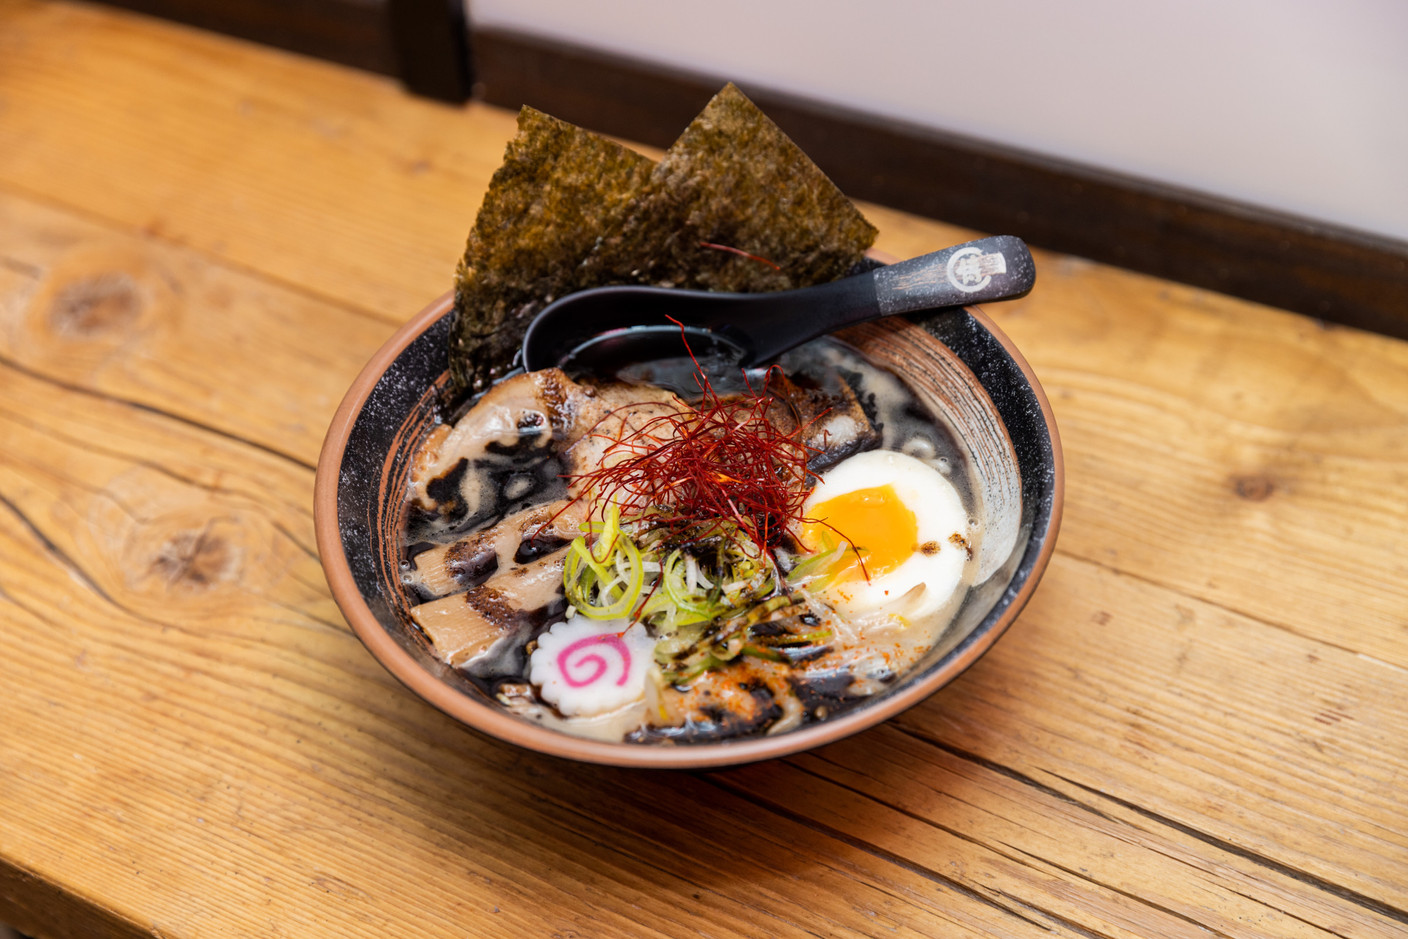 In the chef’s ramen, a thick, spicy broth contains slices of lightly caramelised pork chashu. Photo: Romain Gamba / Maison Moderne